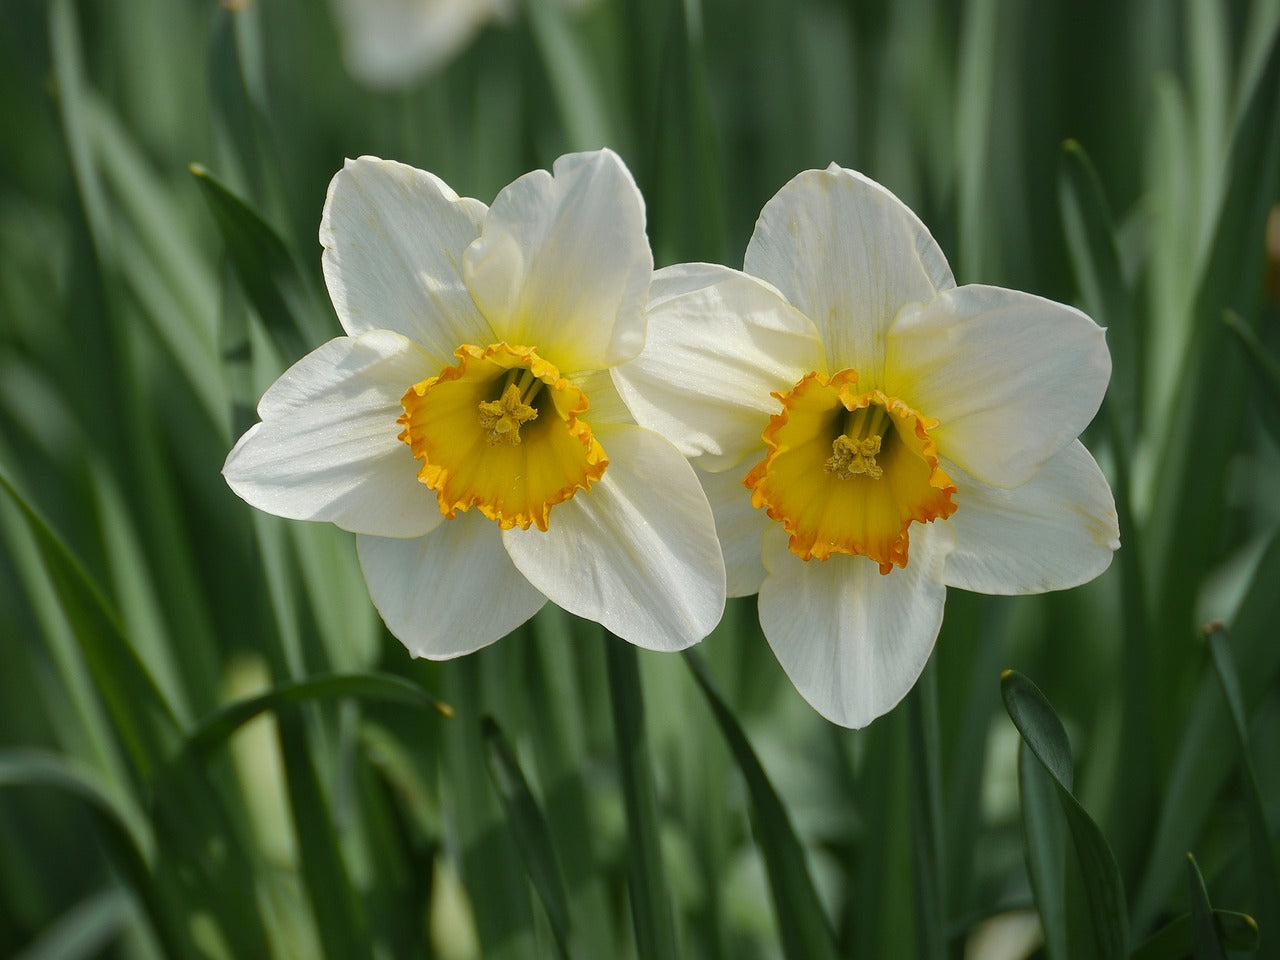 How to plant Daffodils